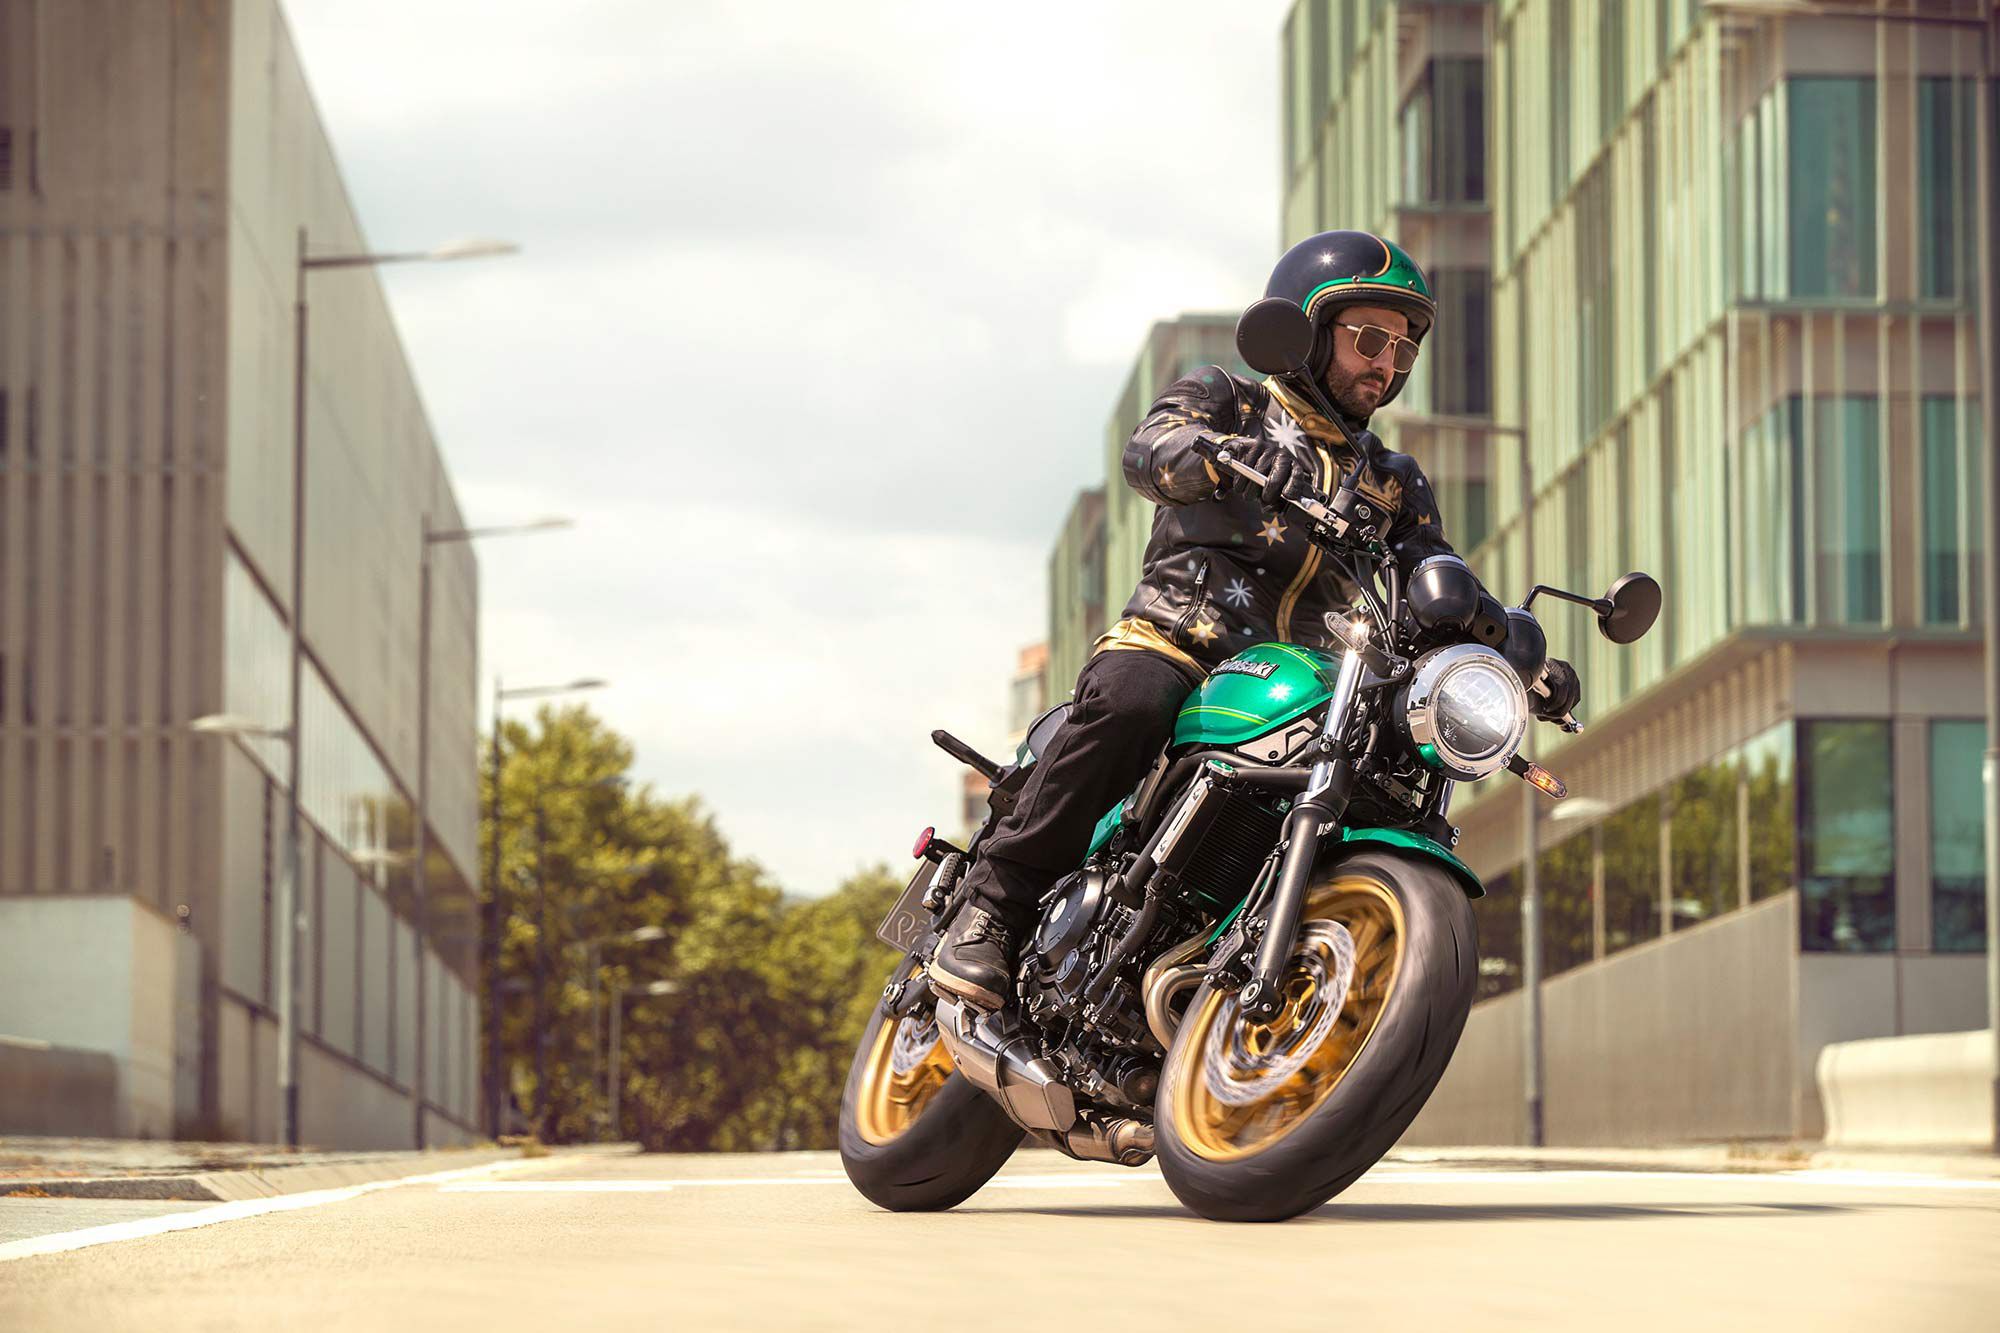 Kawasaki brings retro-sport styling to the masses with the Z650RS.